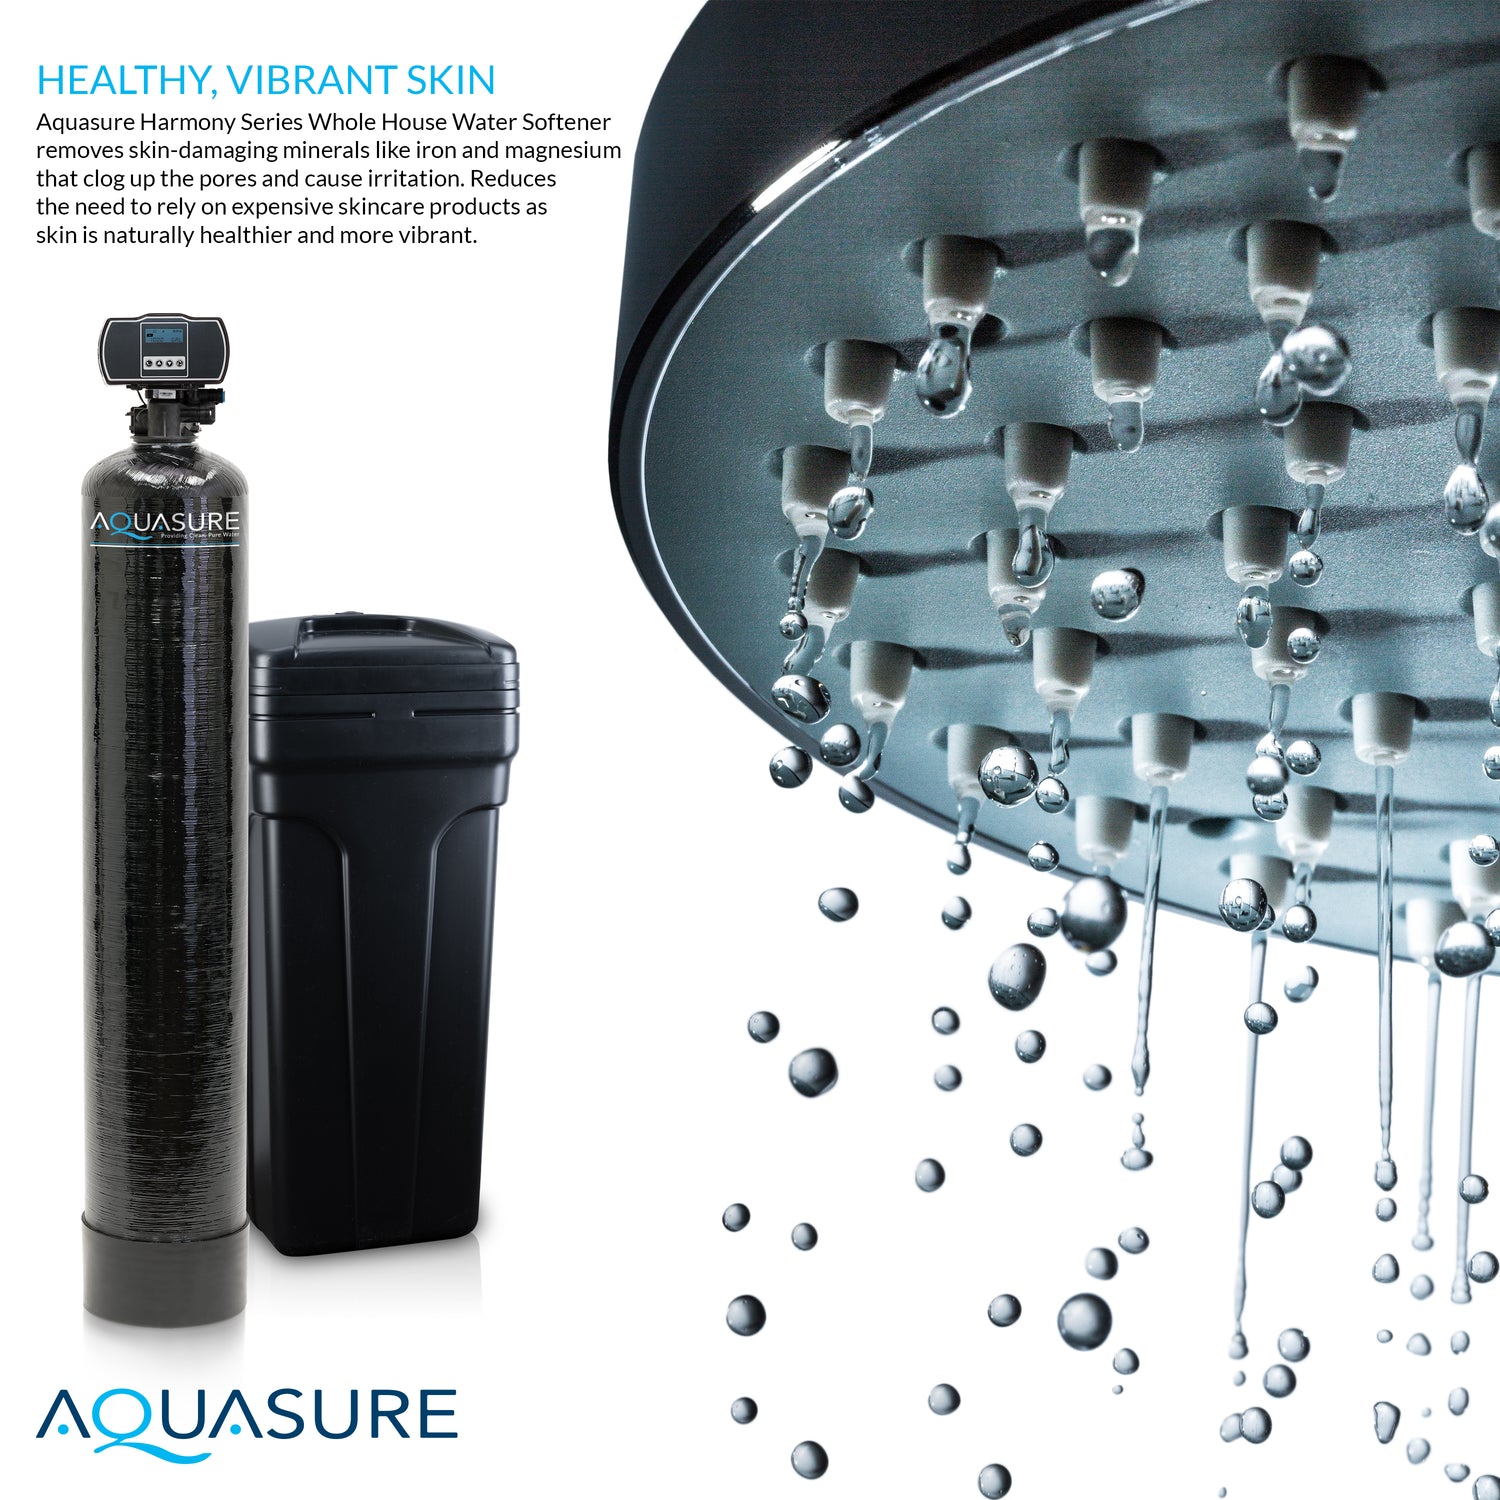 Signature Series | 64,000 Grains Water Softener with 12 GPM Quantum UV Purification and 75 GPD Reverse Osmosis RO System